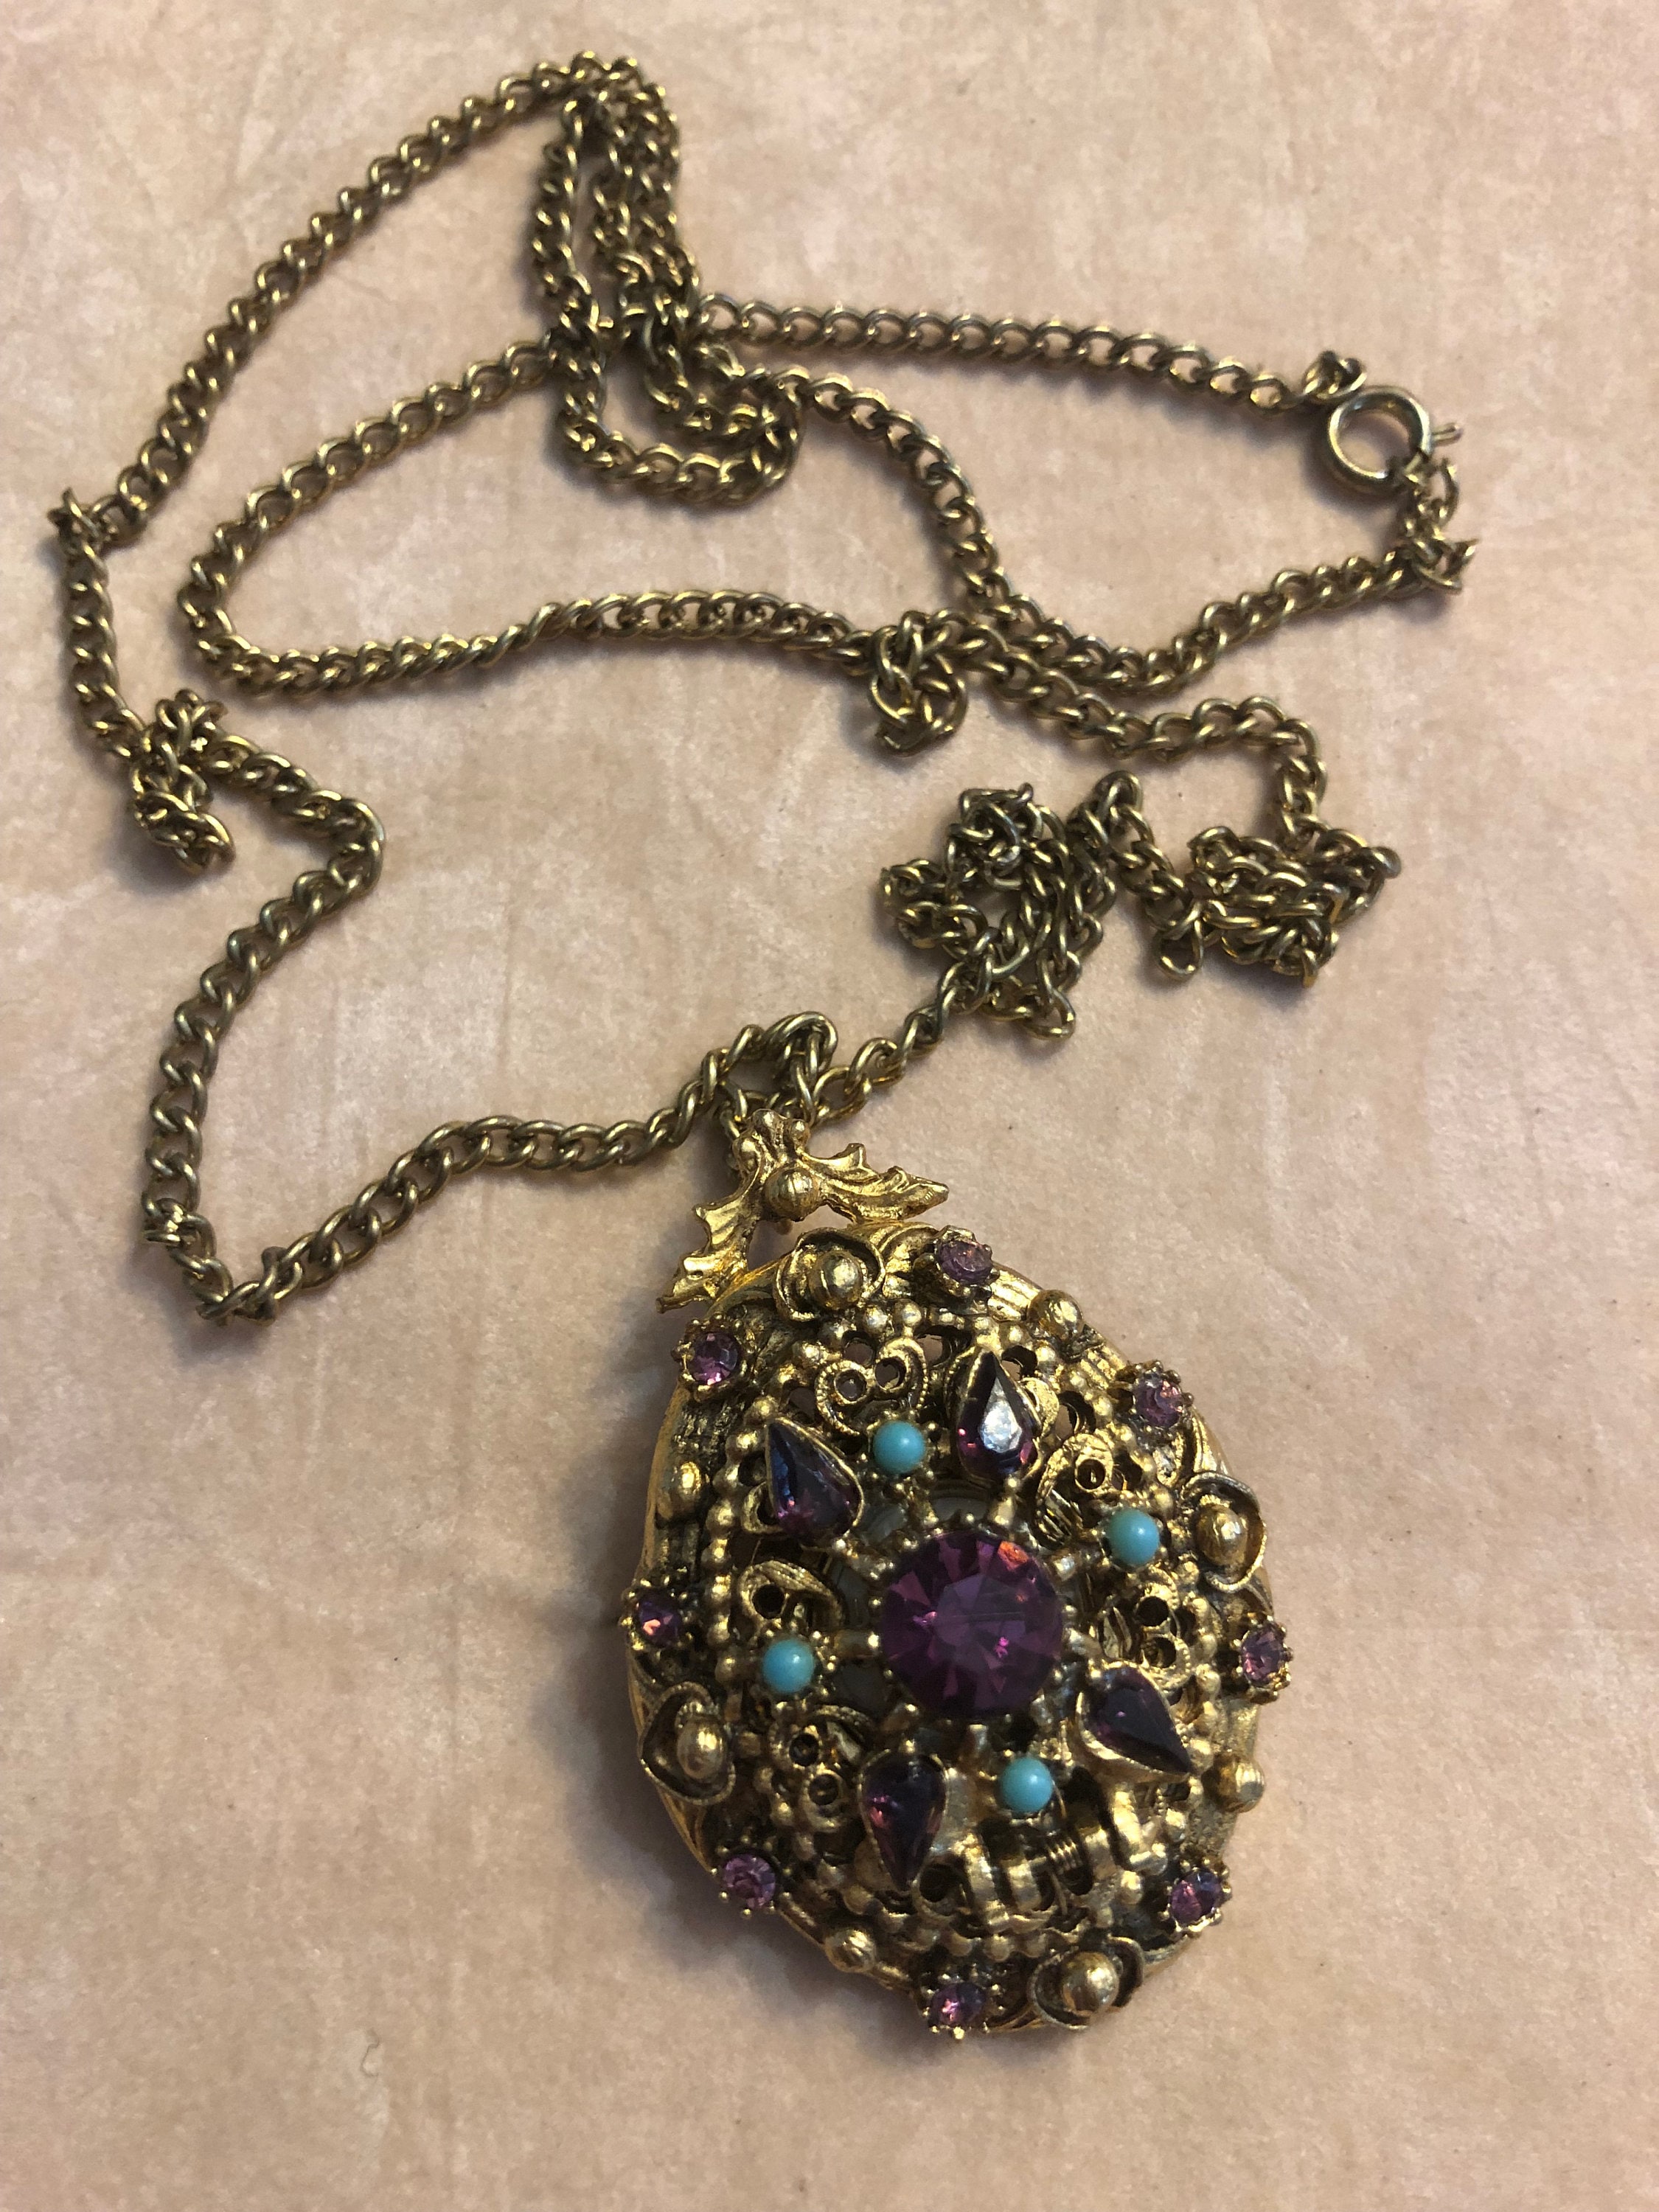 Attempting To Identify Lucerne (Necklace? Pendant? Ladies' Pocket?) Watch |  WatchUSeek Watch Forums